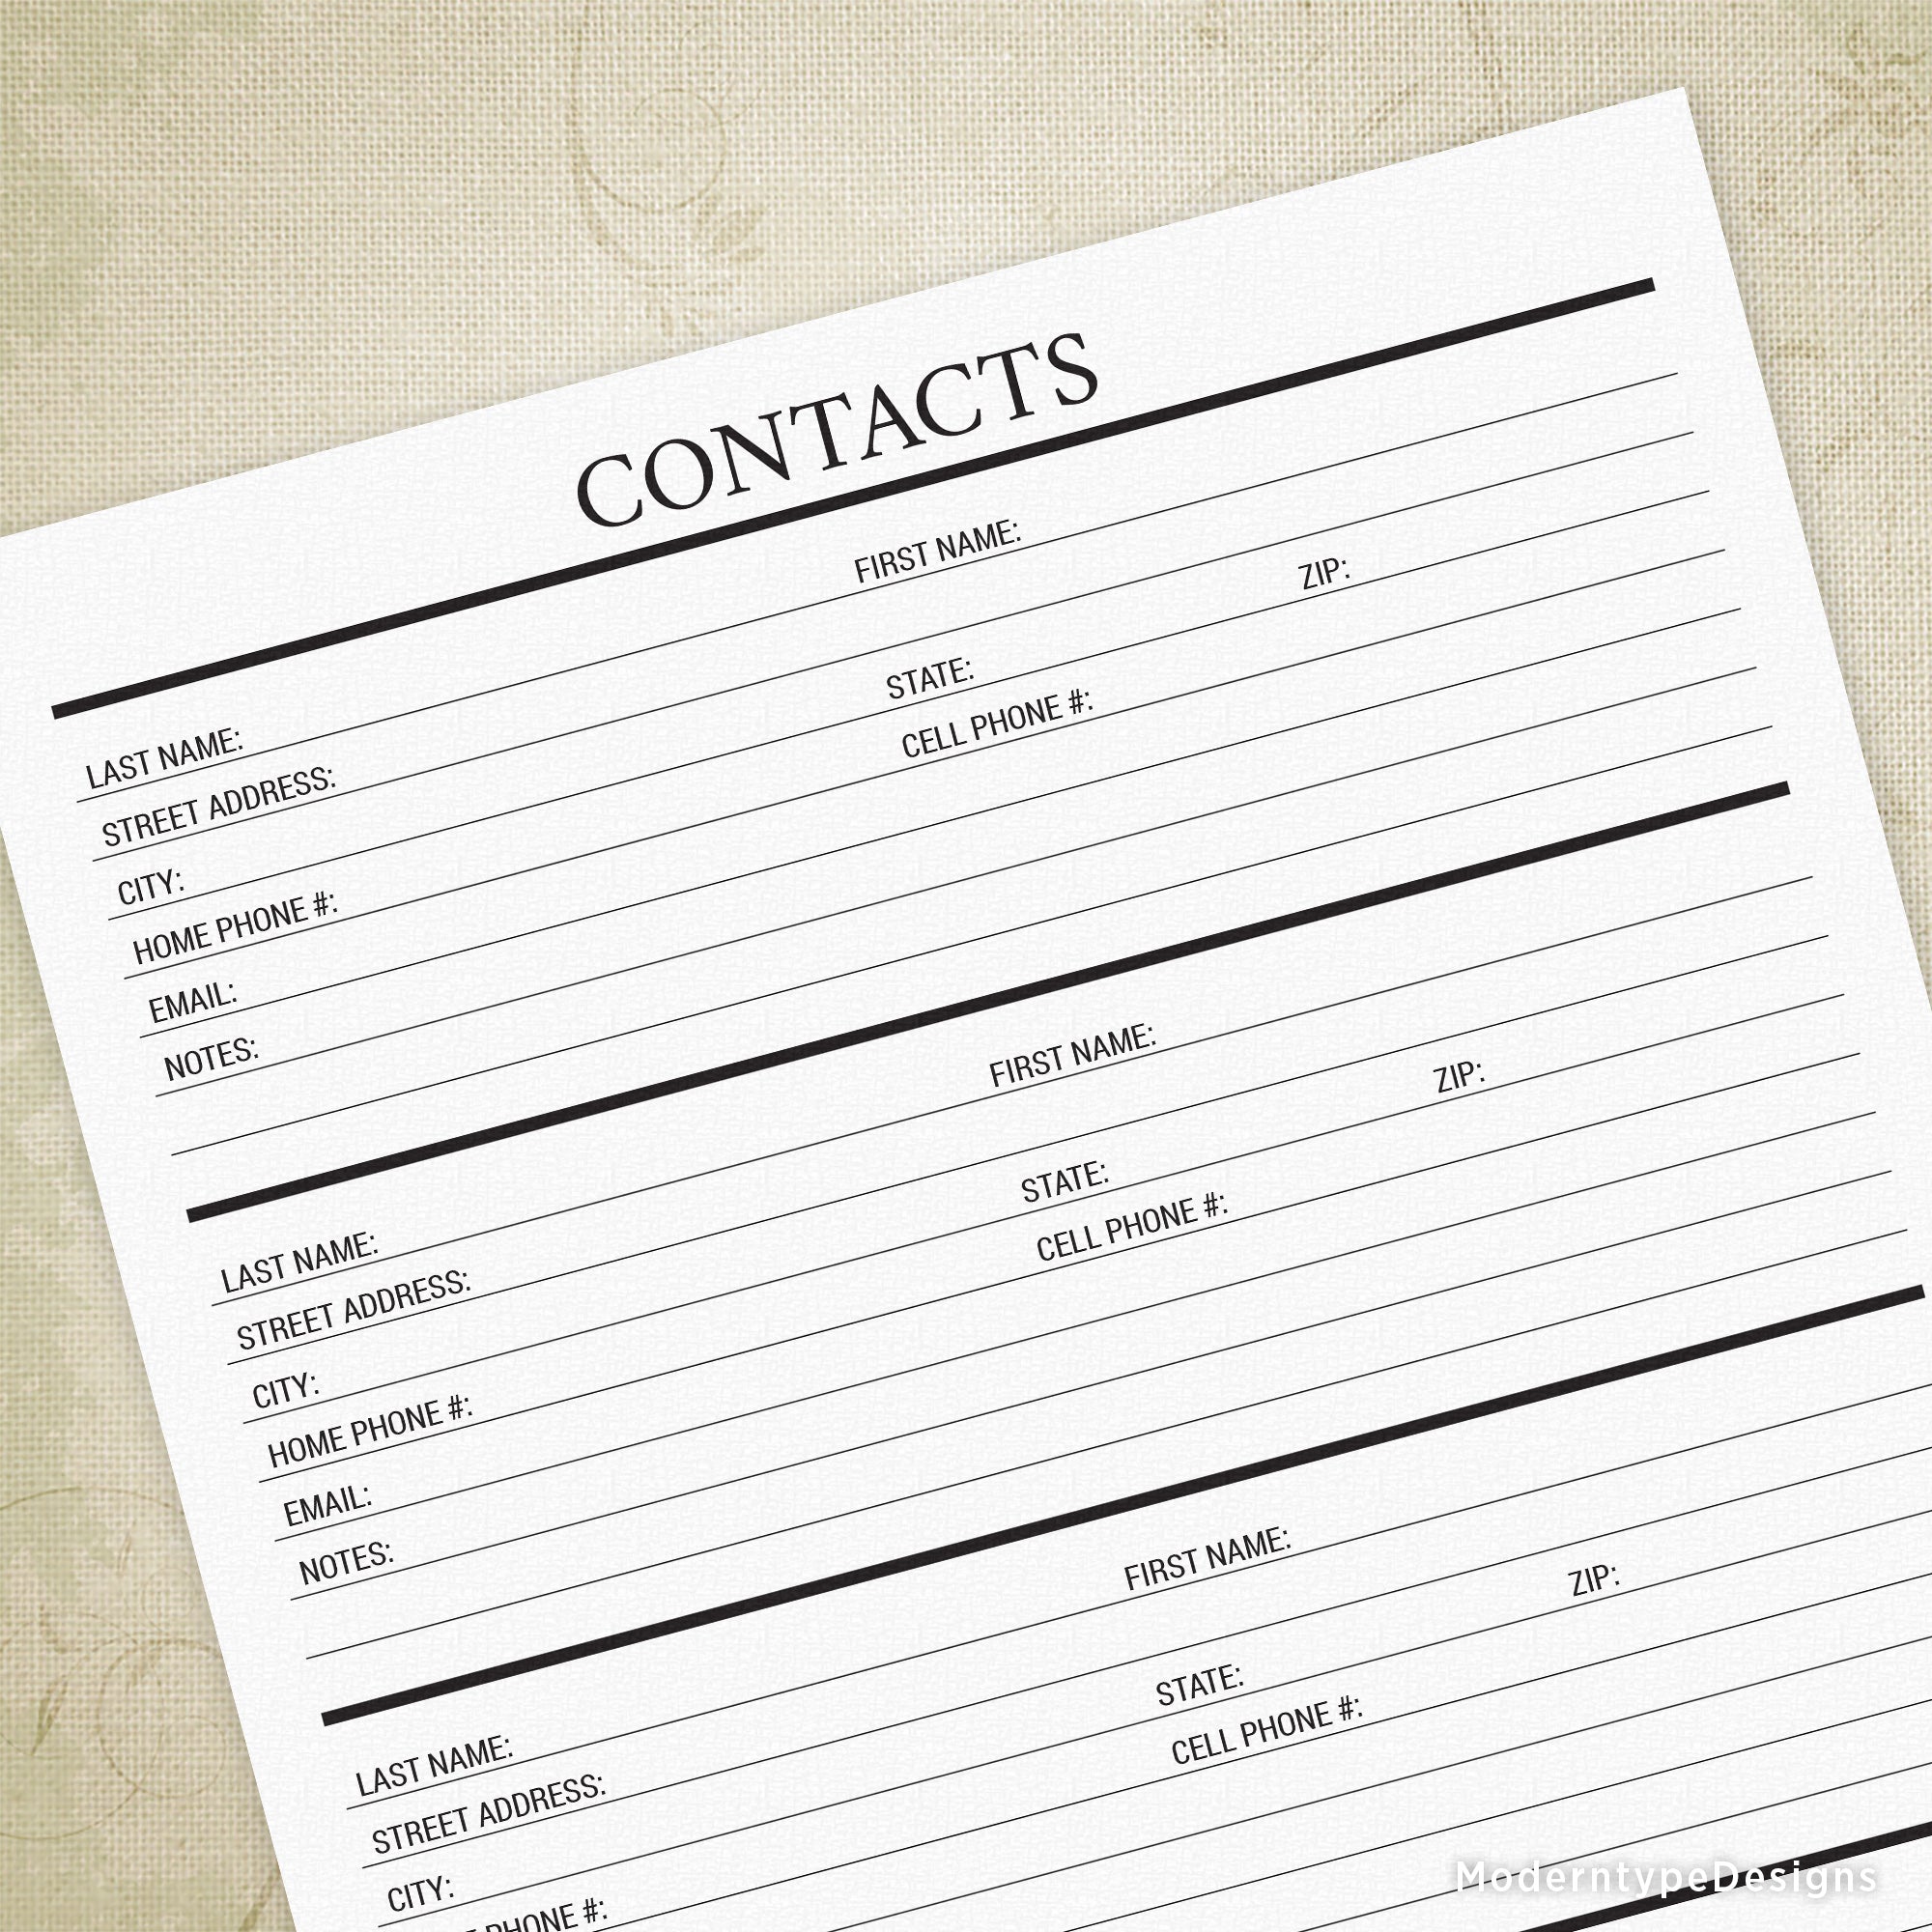 Contacts Printable - End of Life